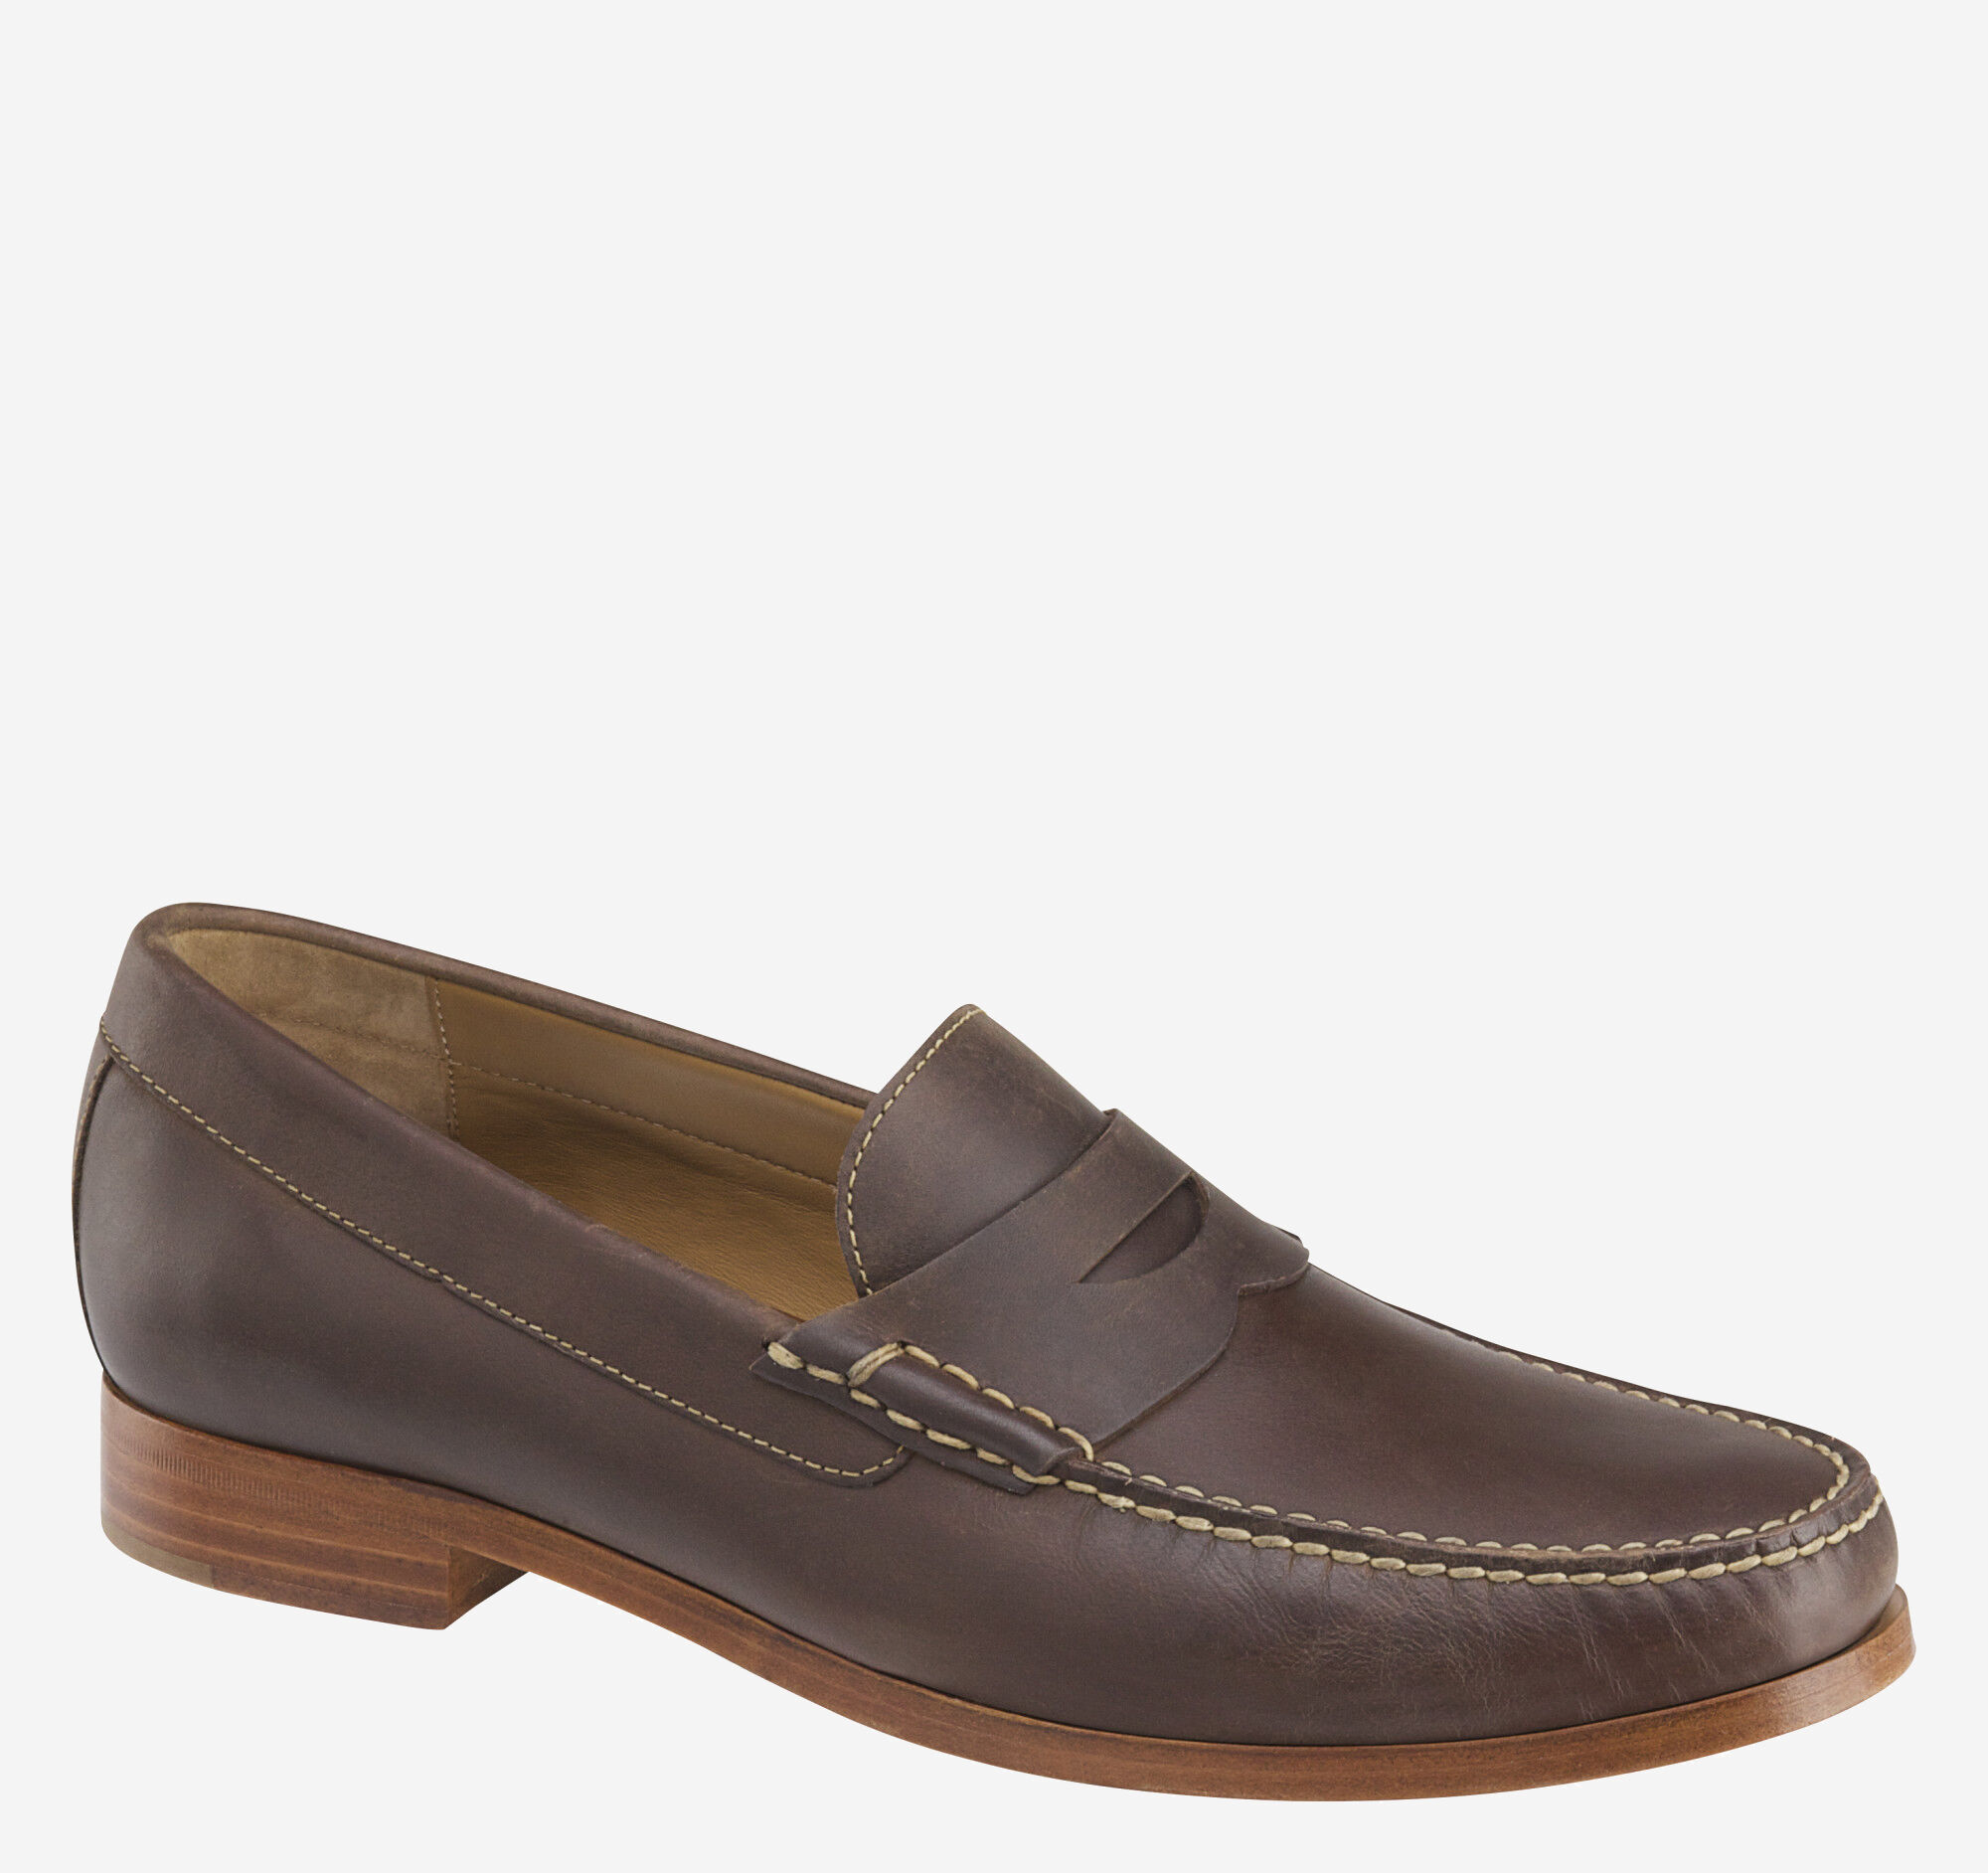 johnston and murphy suede loafers